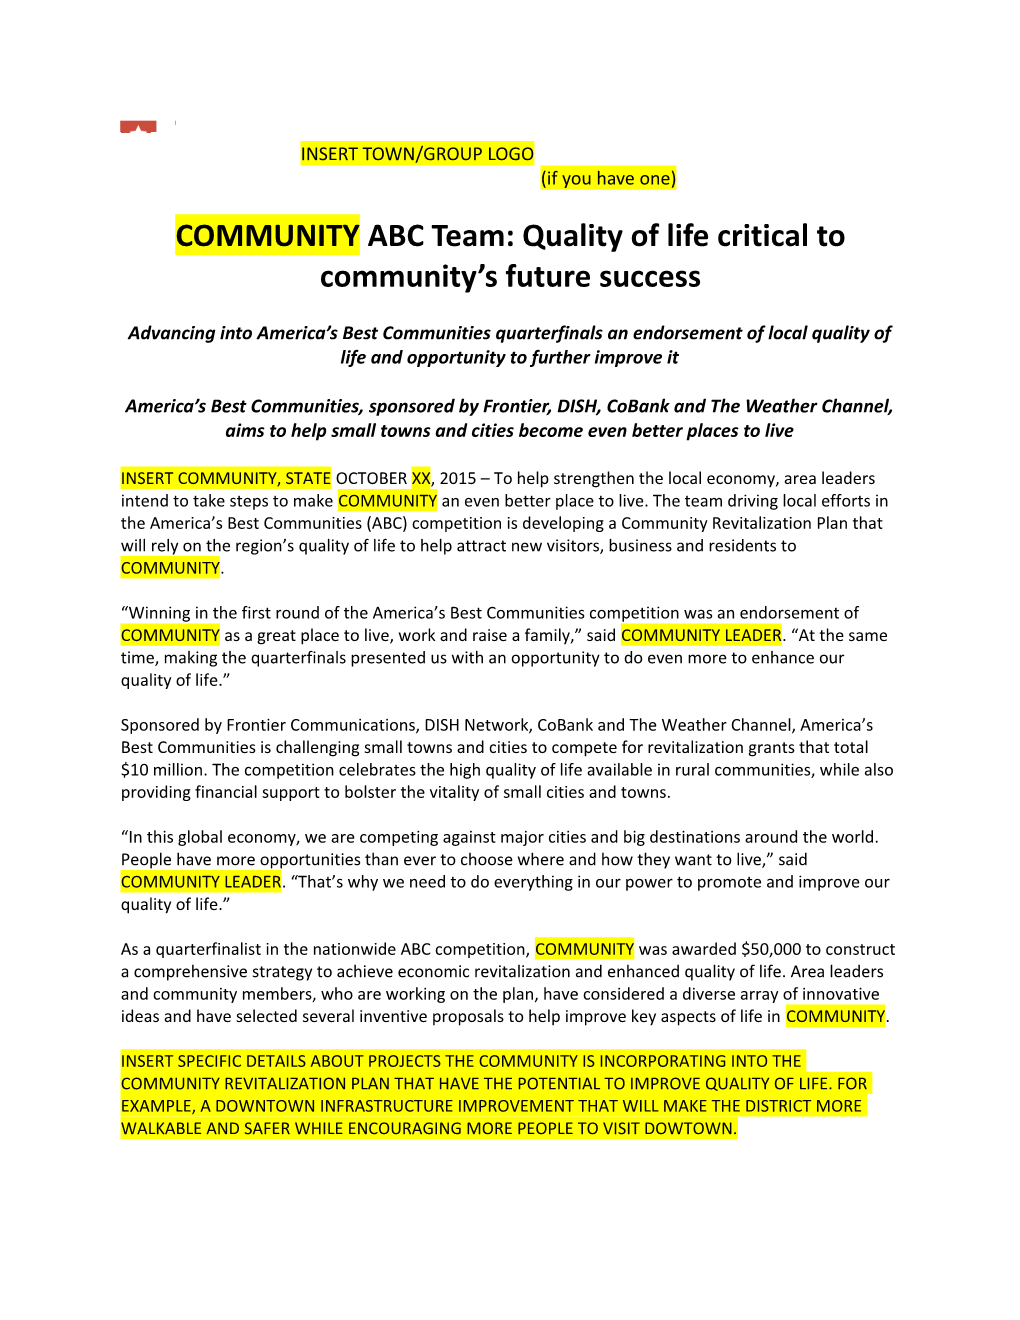 COMMUNITY ABC Team: Quality of Life Critical to Community S Future Success